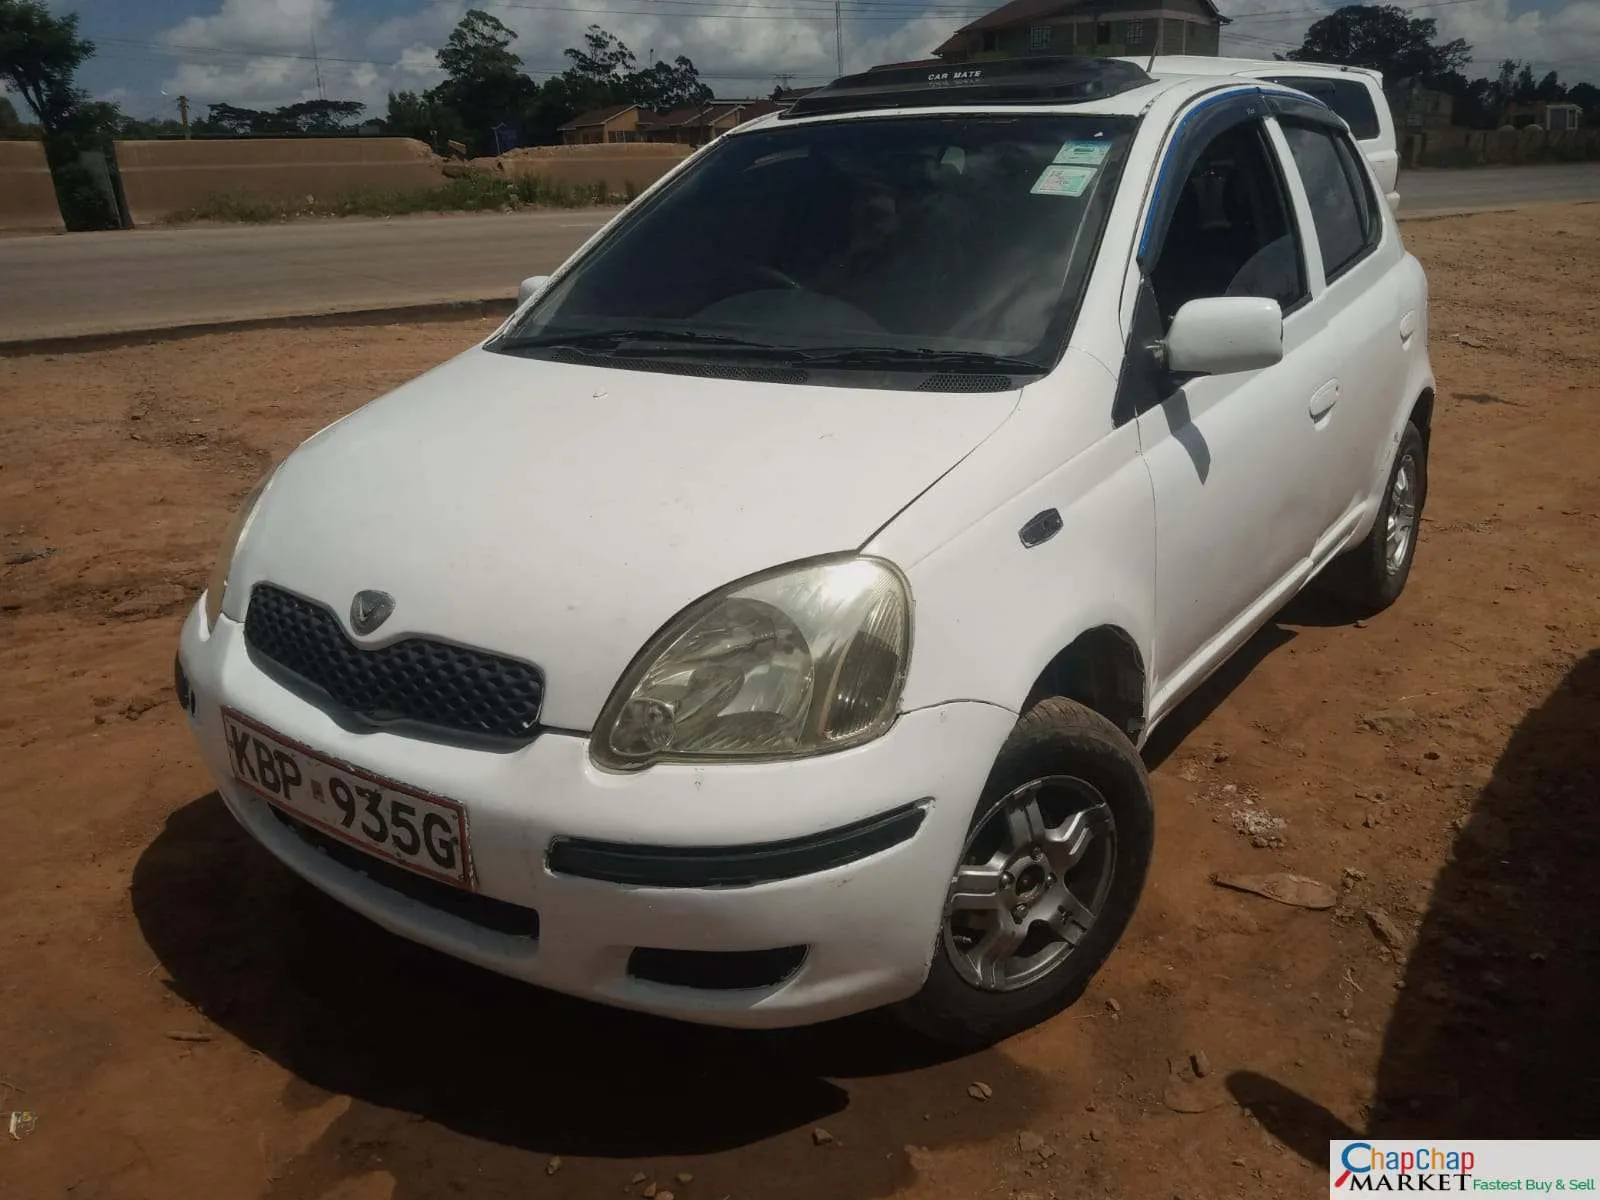 Toyota Vitz 1300cc 290k Only QUICK SALE You Pay 30% Deposit Trade in OK EXCLUSIVE hire purchase installments (SOLD)